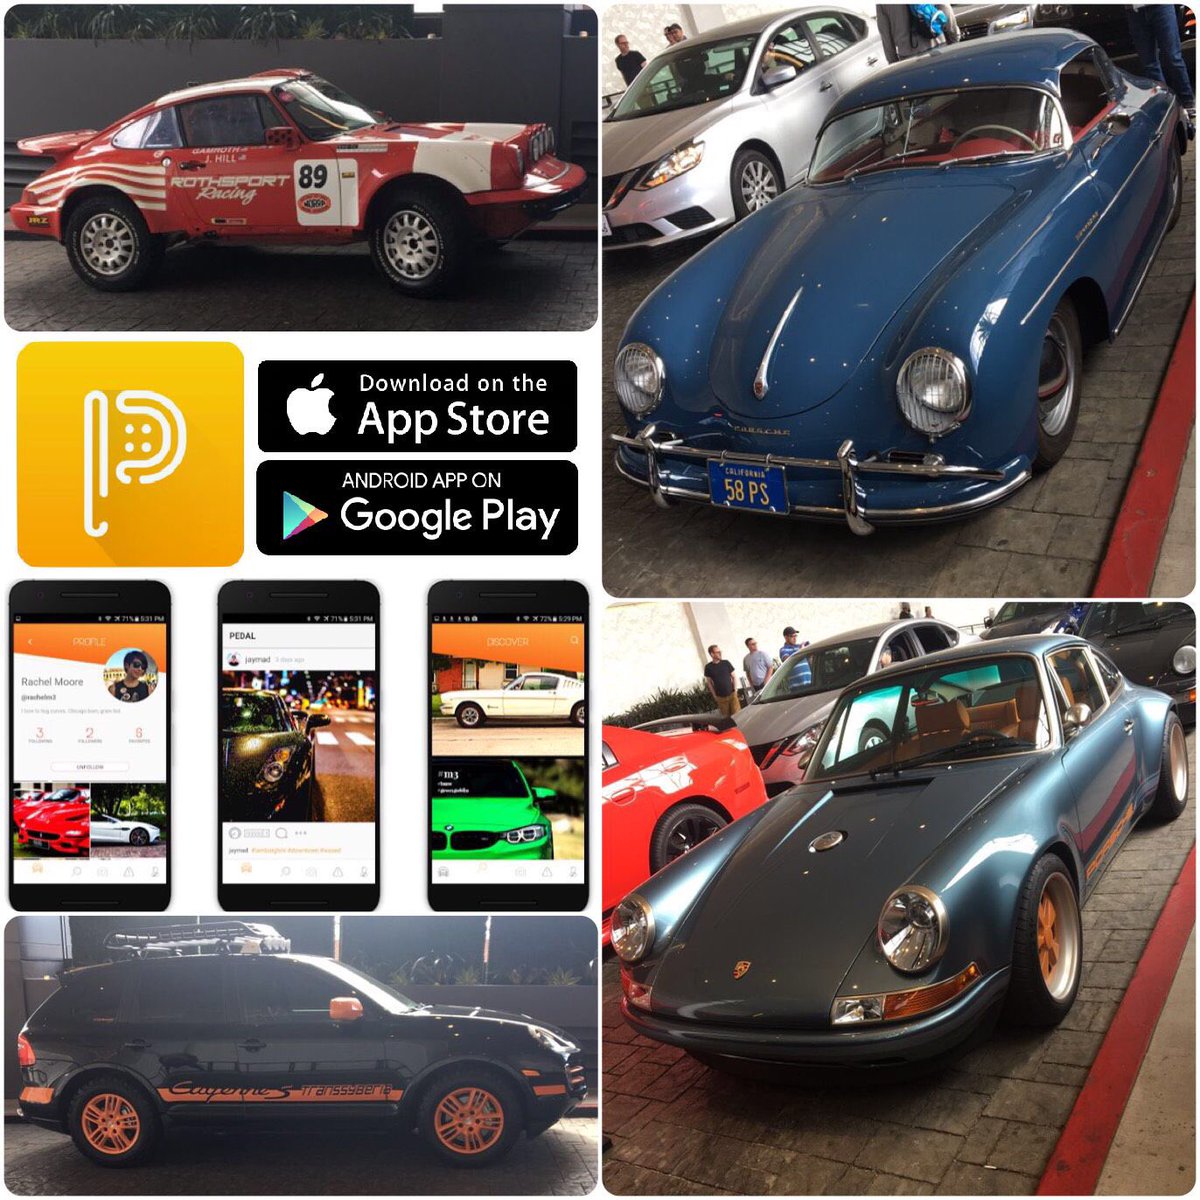 🔶 Outside at the LA Lit & Toy Show 
🔶 PEDAL is a free, must have #automotive #enthusiast picture & video sharing #app
🔶 Get PEDAL - Free in app stores
#lalitandtoyshow #lalitandtoyshow2020 #porsche #porsche356 #porsche911 #porsche911turbo #classicporsche #singerporsche